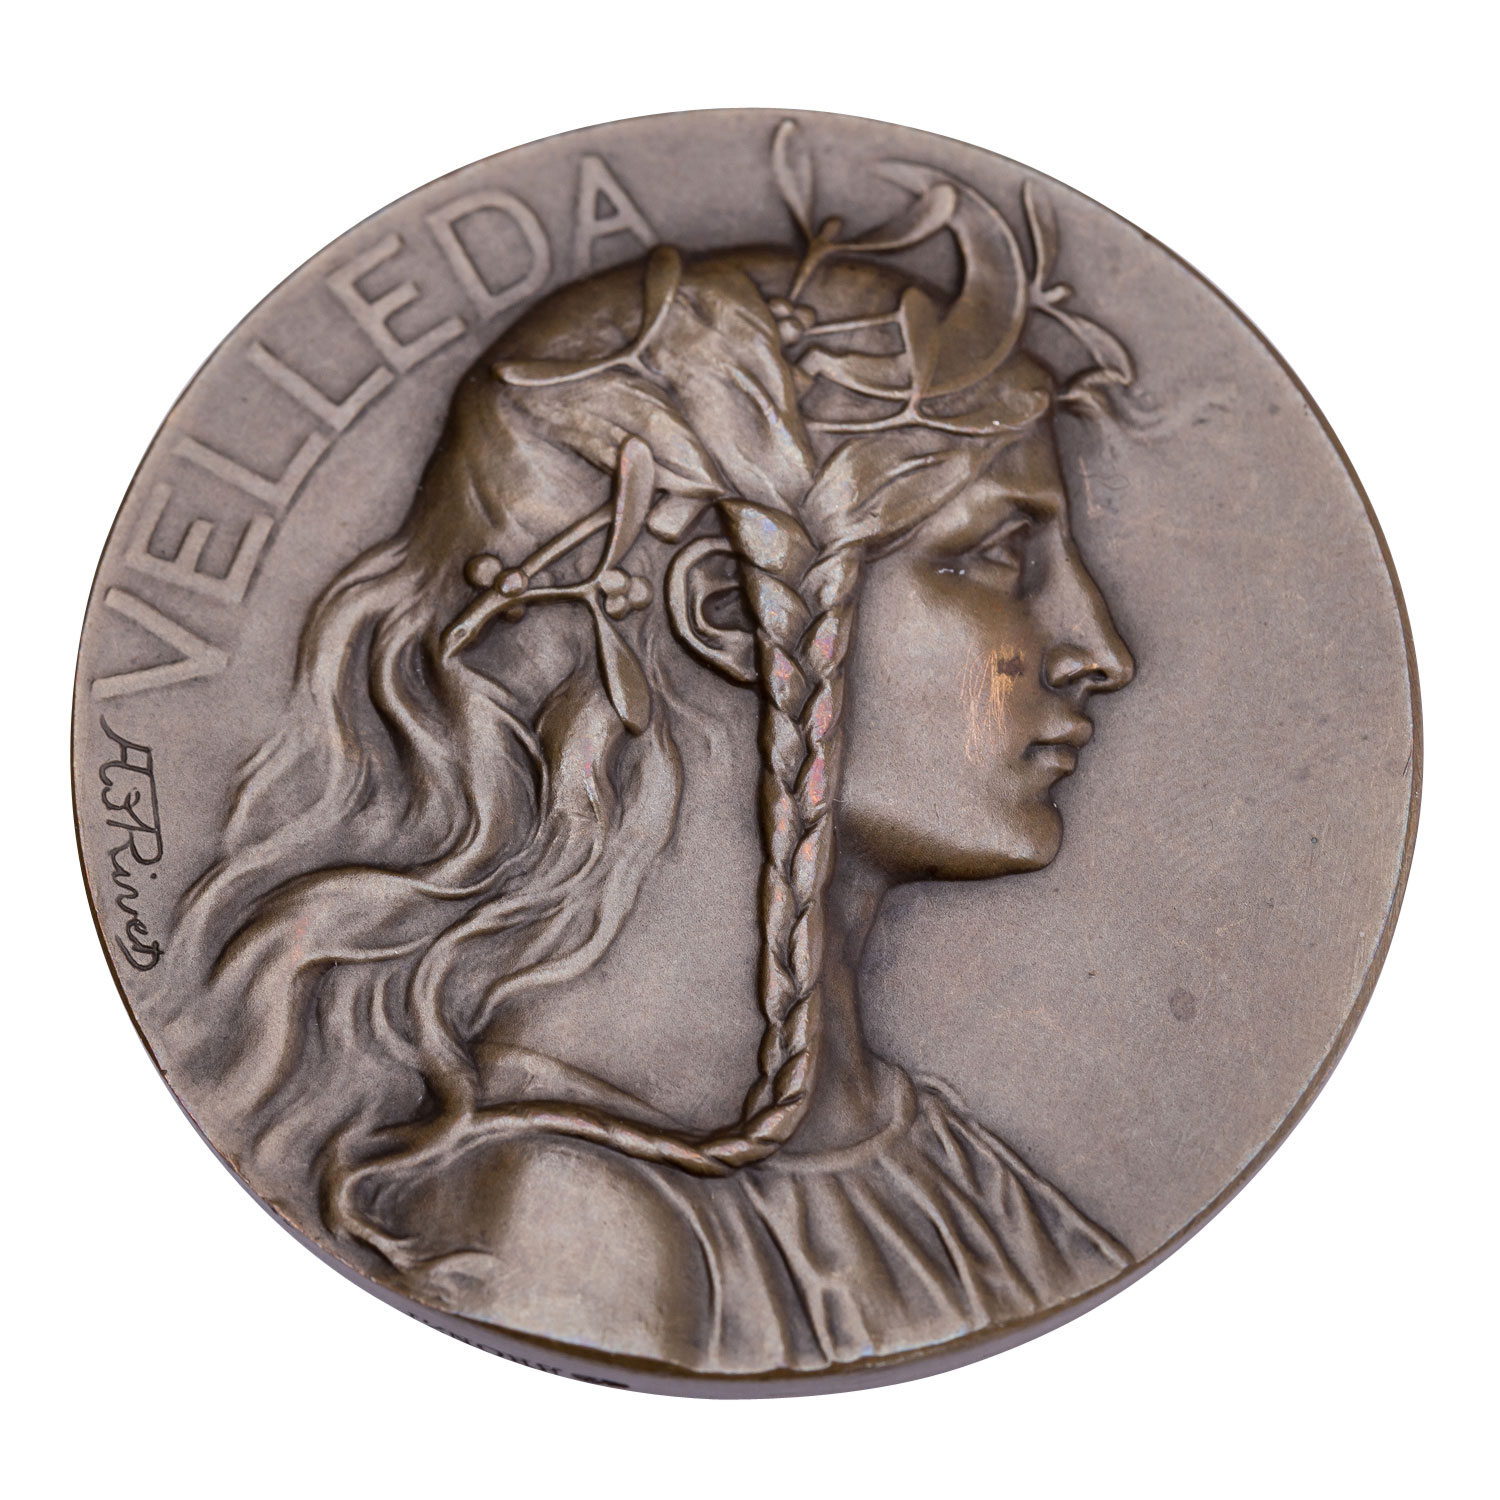 Frankreich - Bronzemedaille o.J., Rivet, Adolphe (1855-1925), - Image 2 of 2